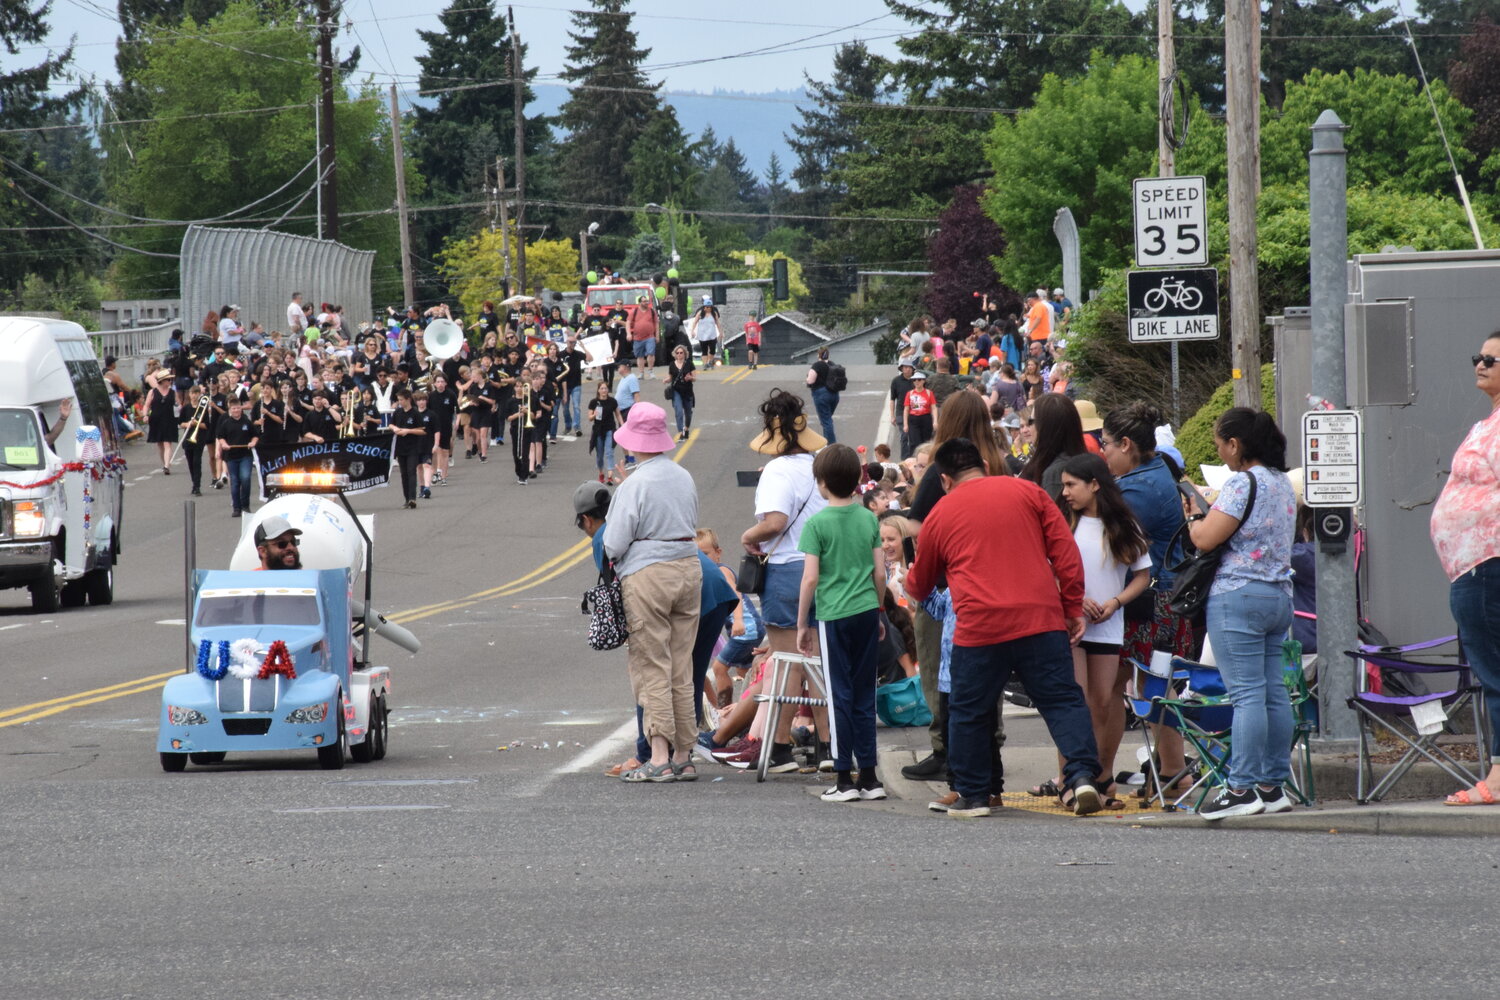 A miniature cement truck dispenses candy to paradegoers at the 2023 Hazel Dell Parade of Bands on May 20.